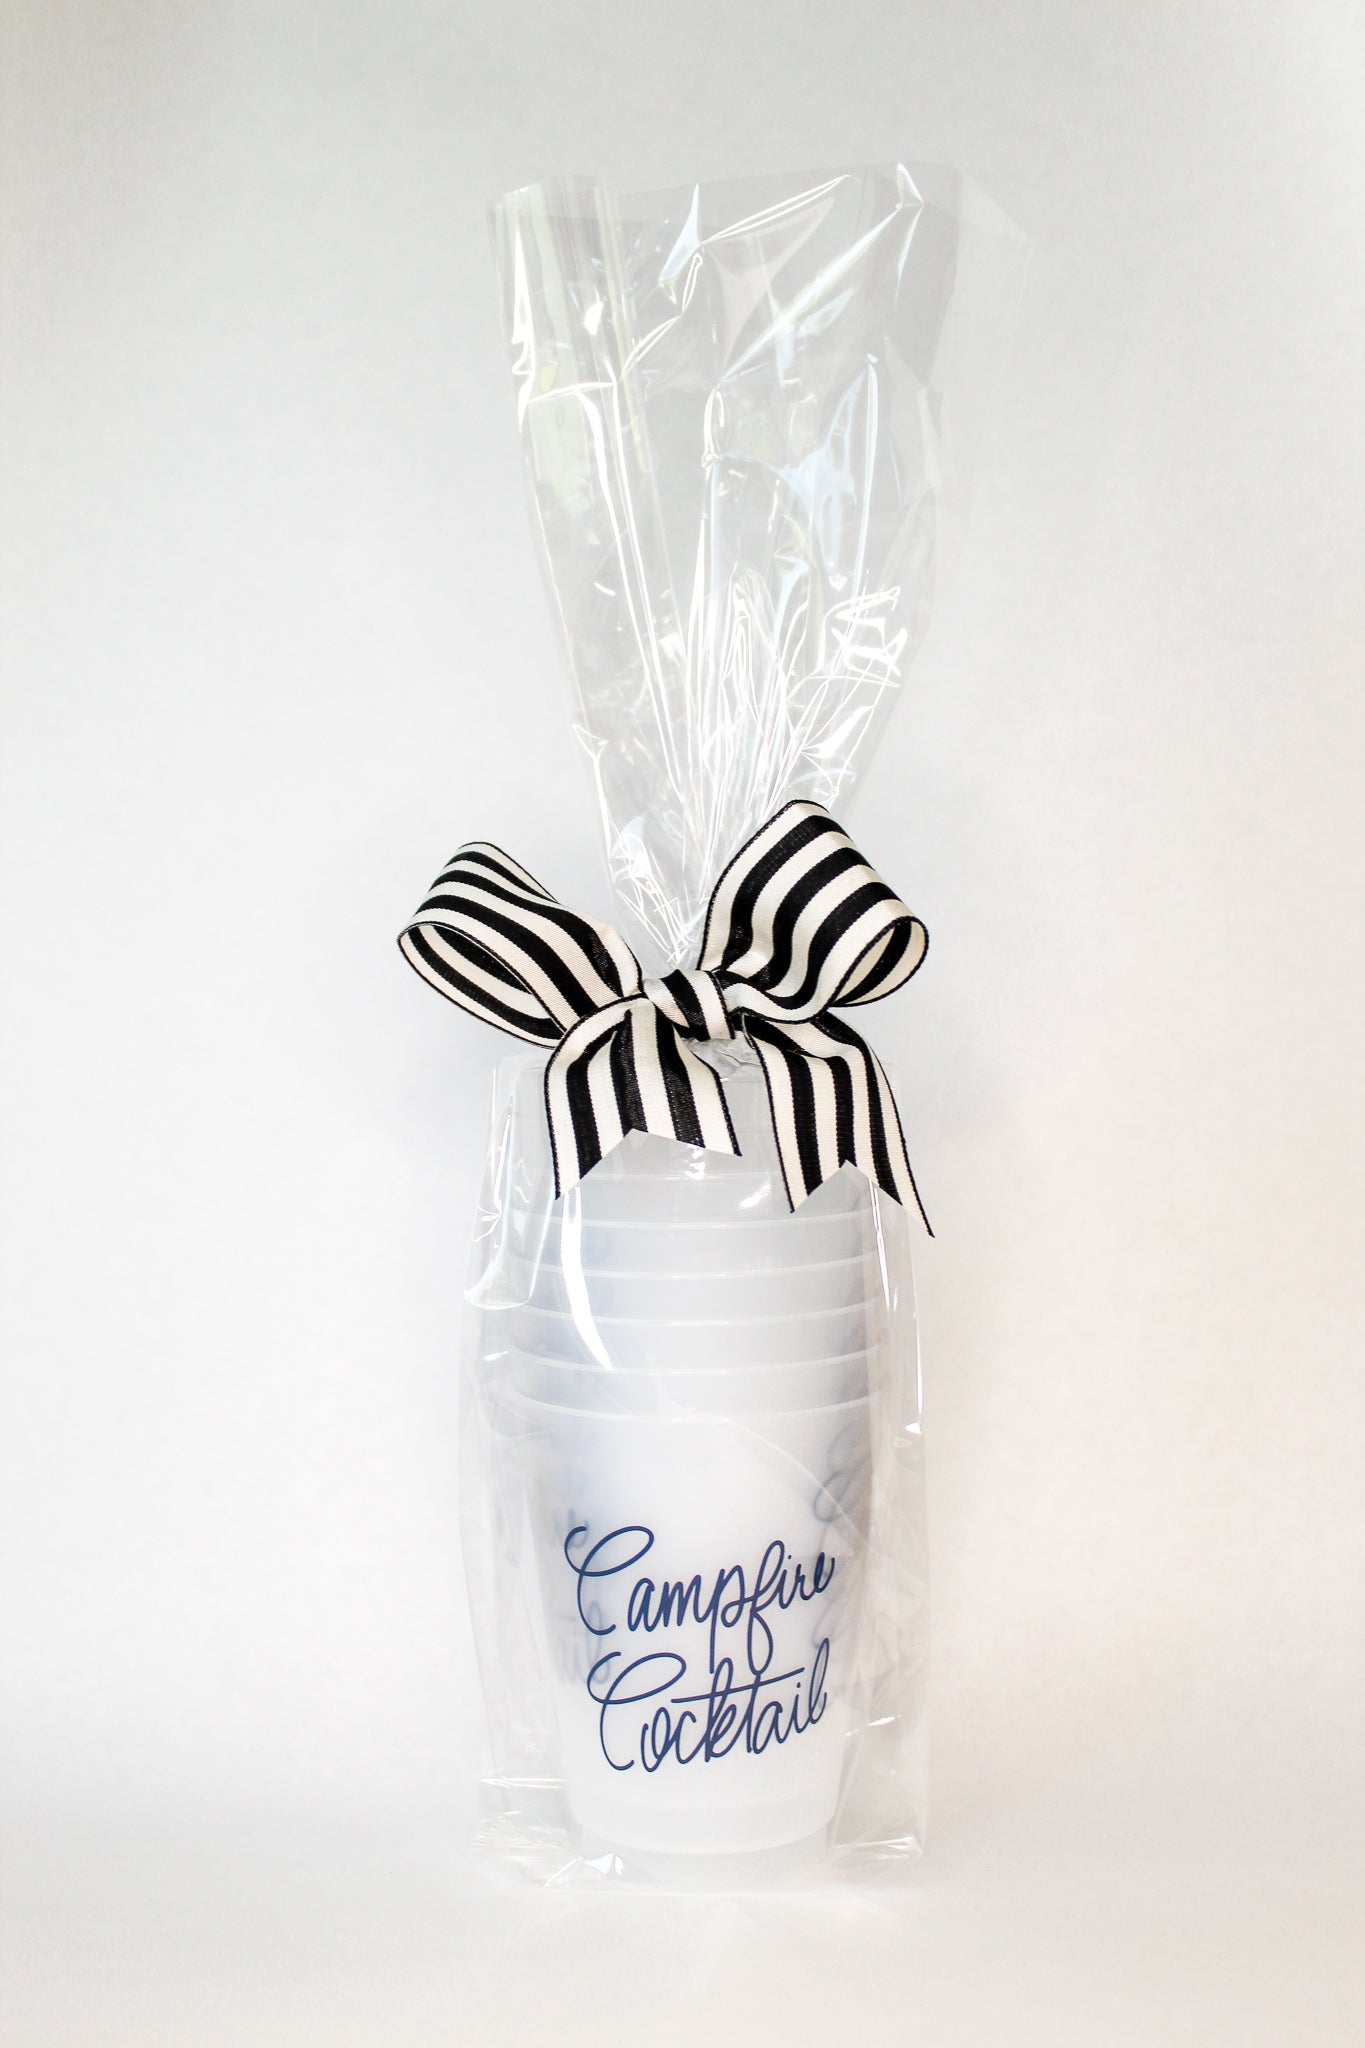 navy Campfire Cocktail Party Cups